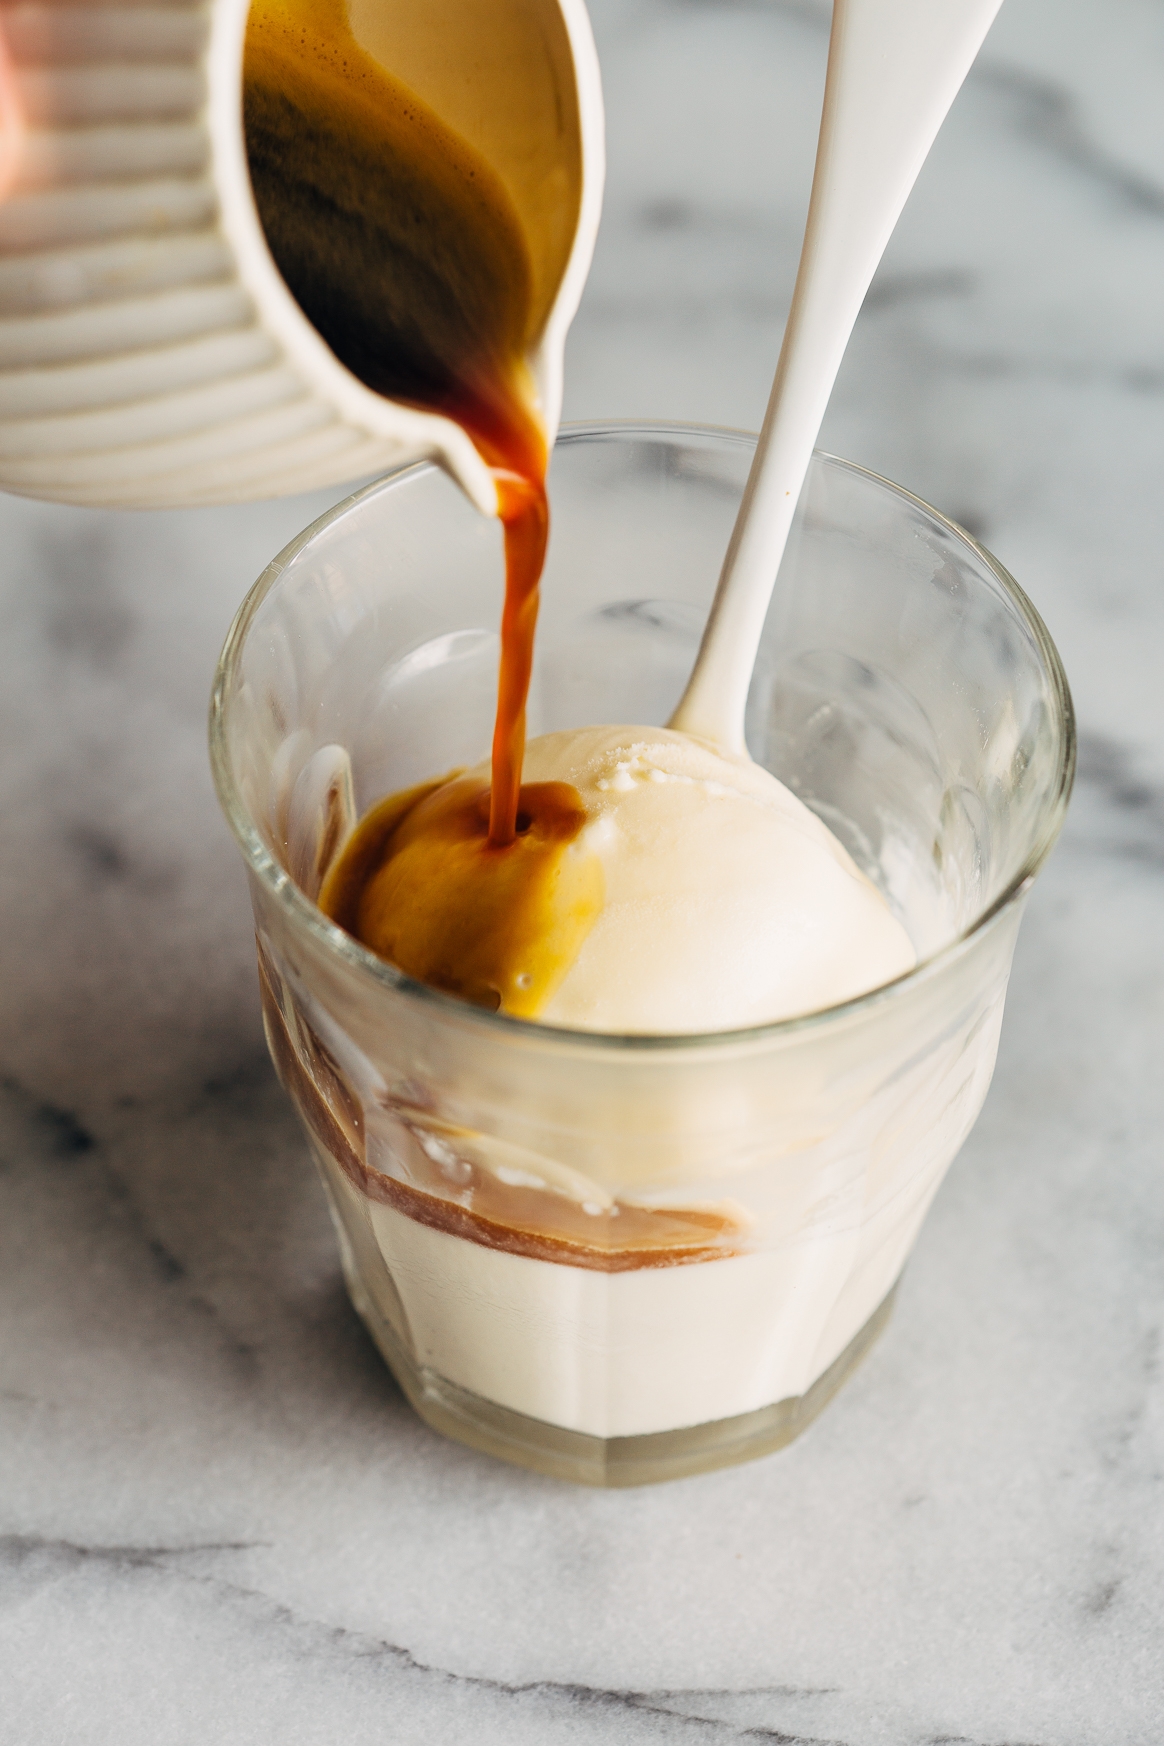 The Best and Easiest Affogato Recipe To Make At Home - DeLallo